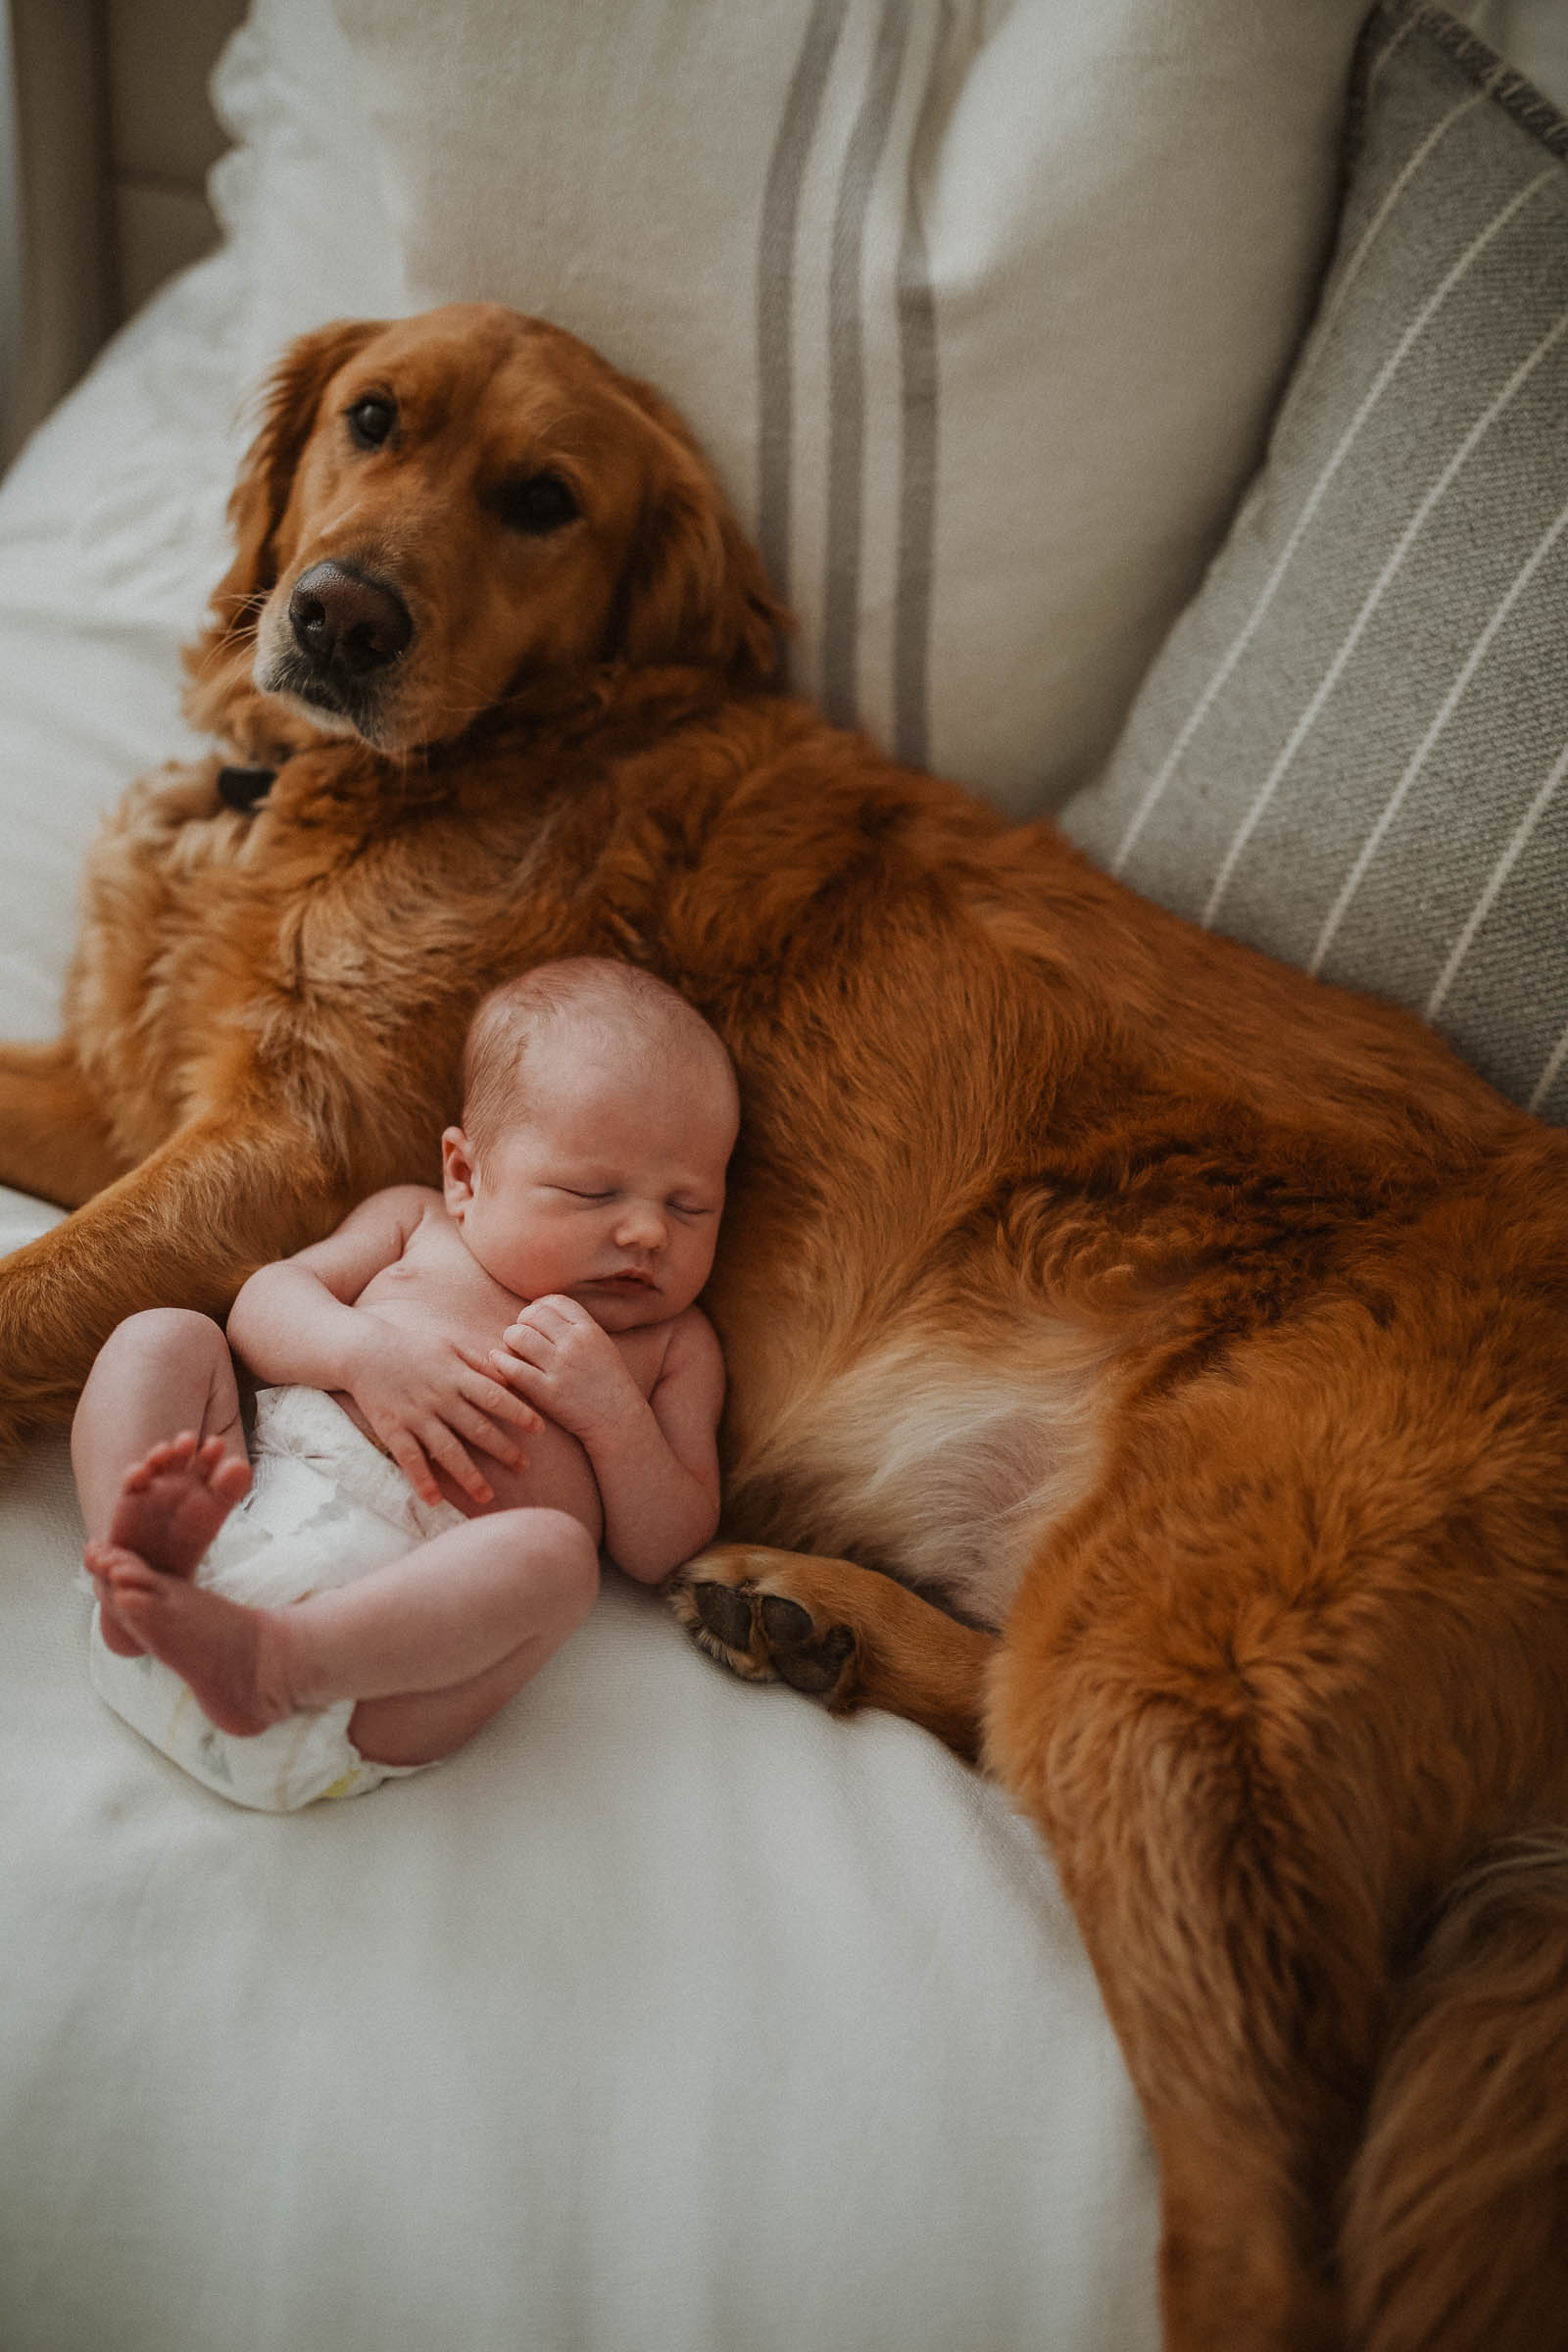 newborn baby snuggling with family dog